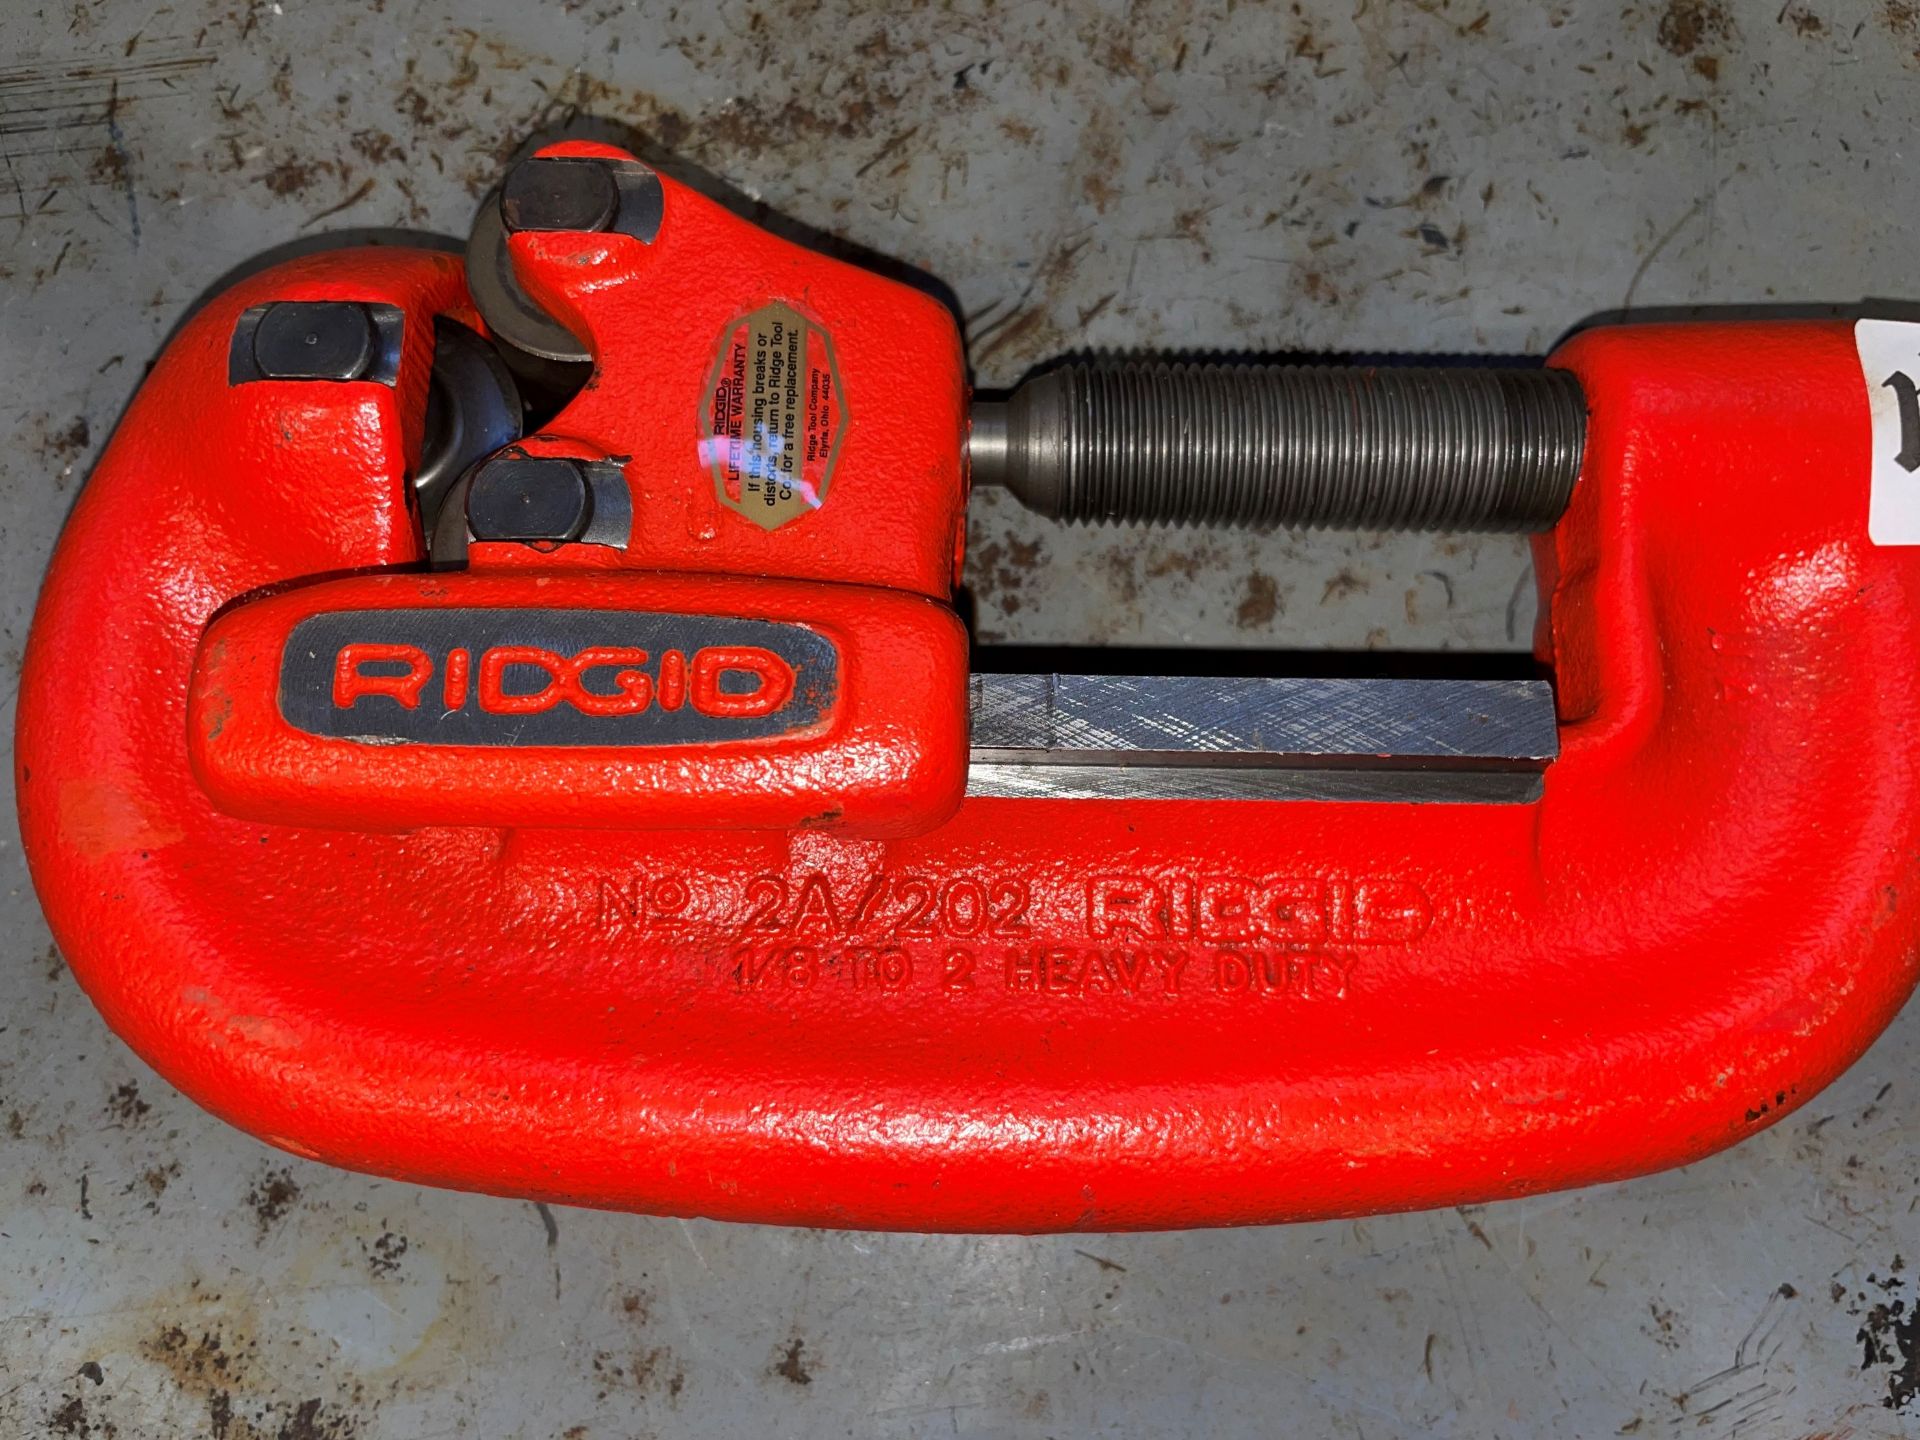 Ridgid No. 2A/202 Heavy Duty Pipe Cutter - Image 2 of 2